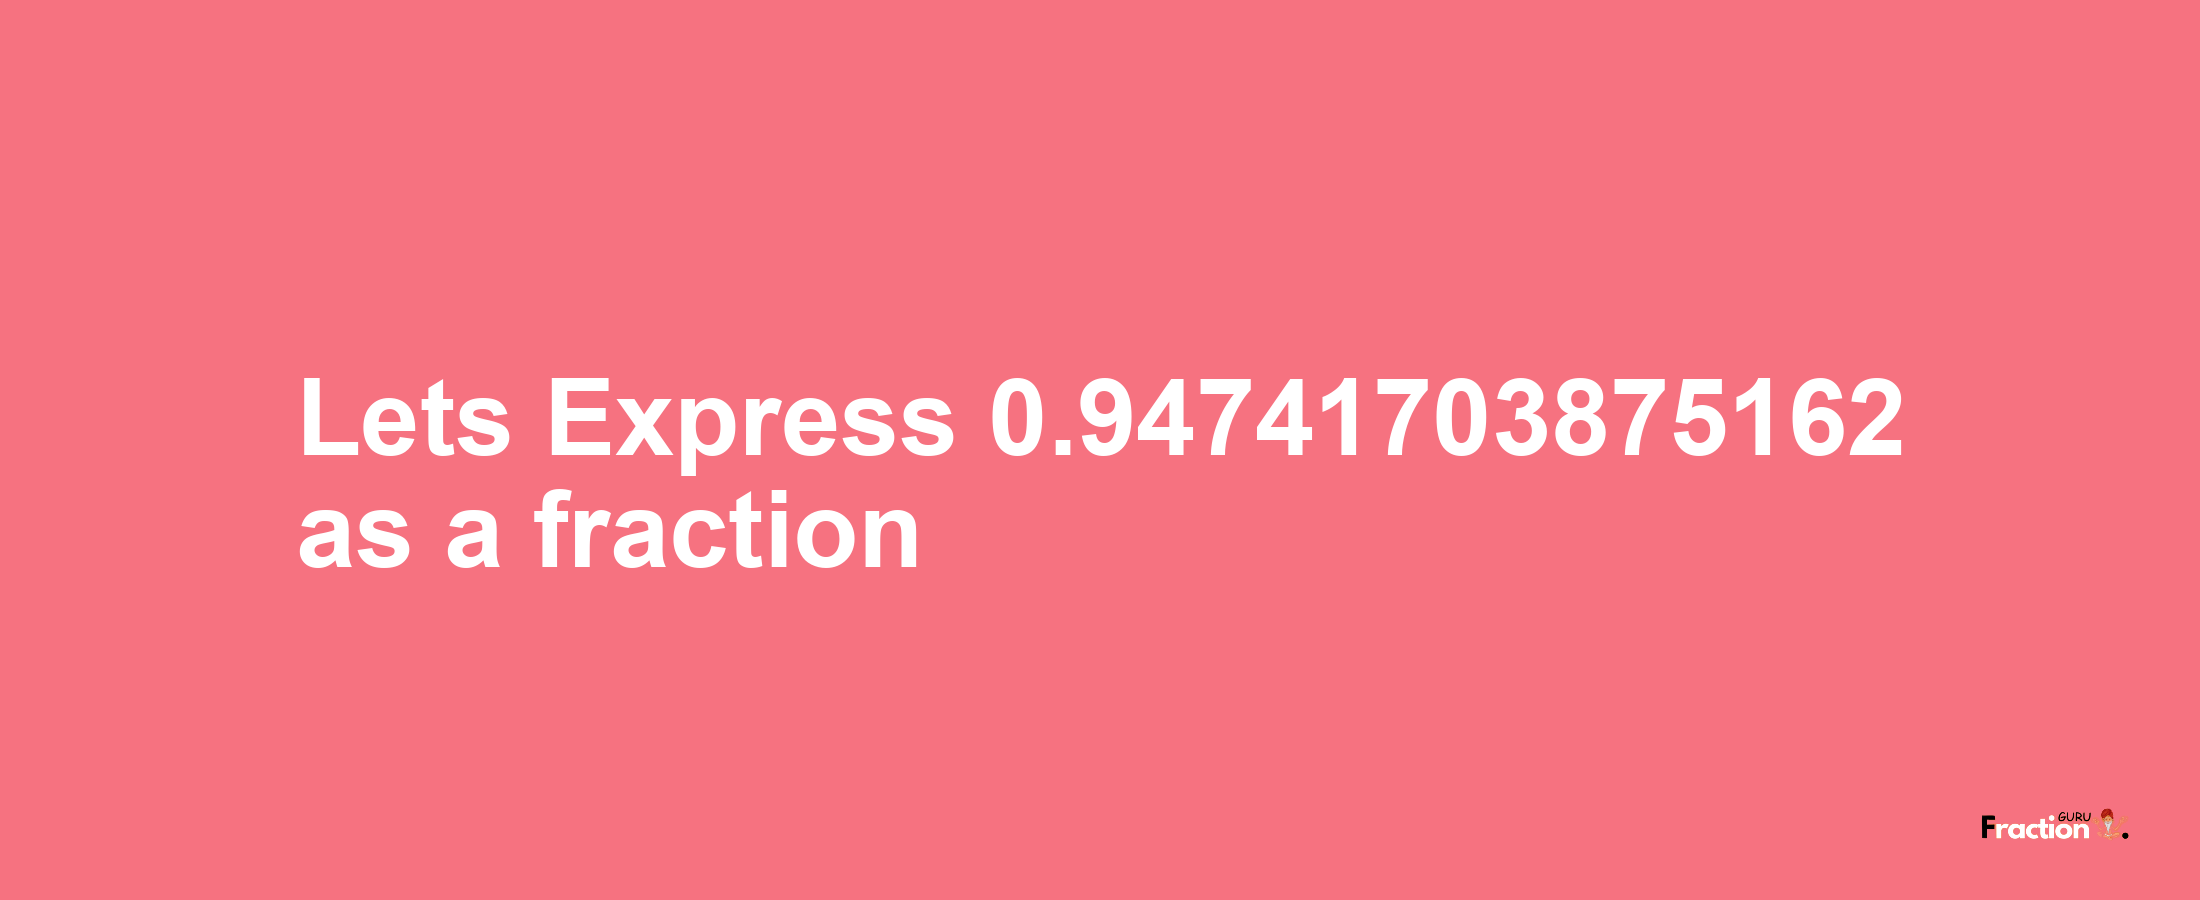 Lets Express 0.94741703875162 as afraction